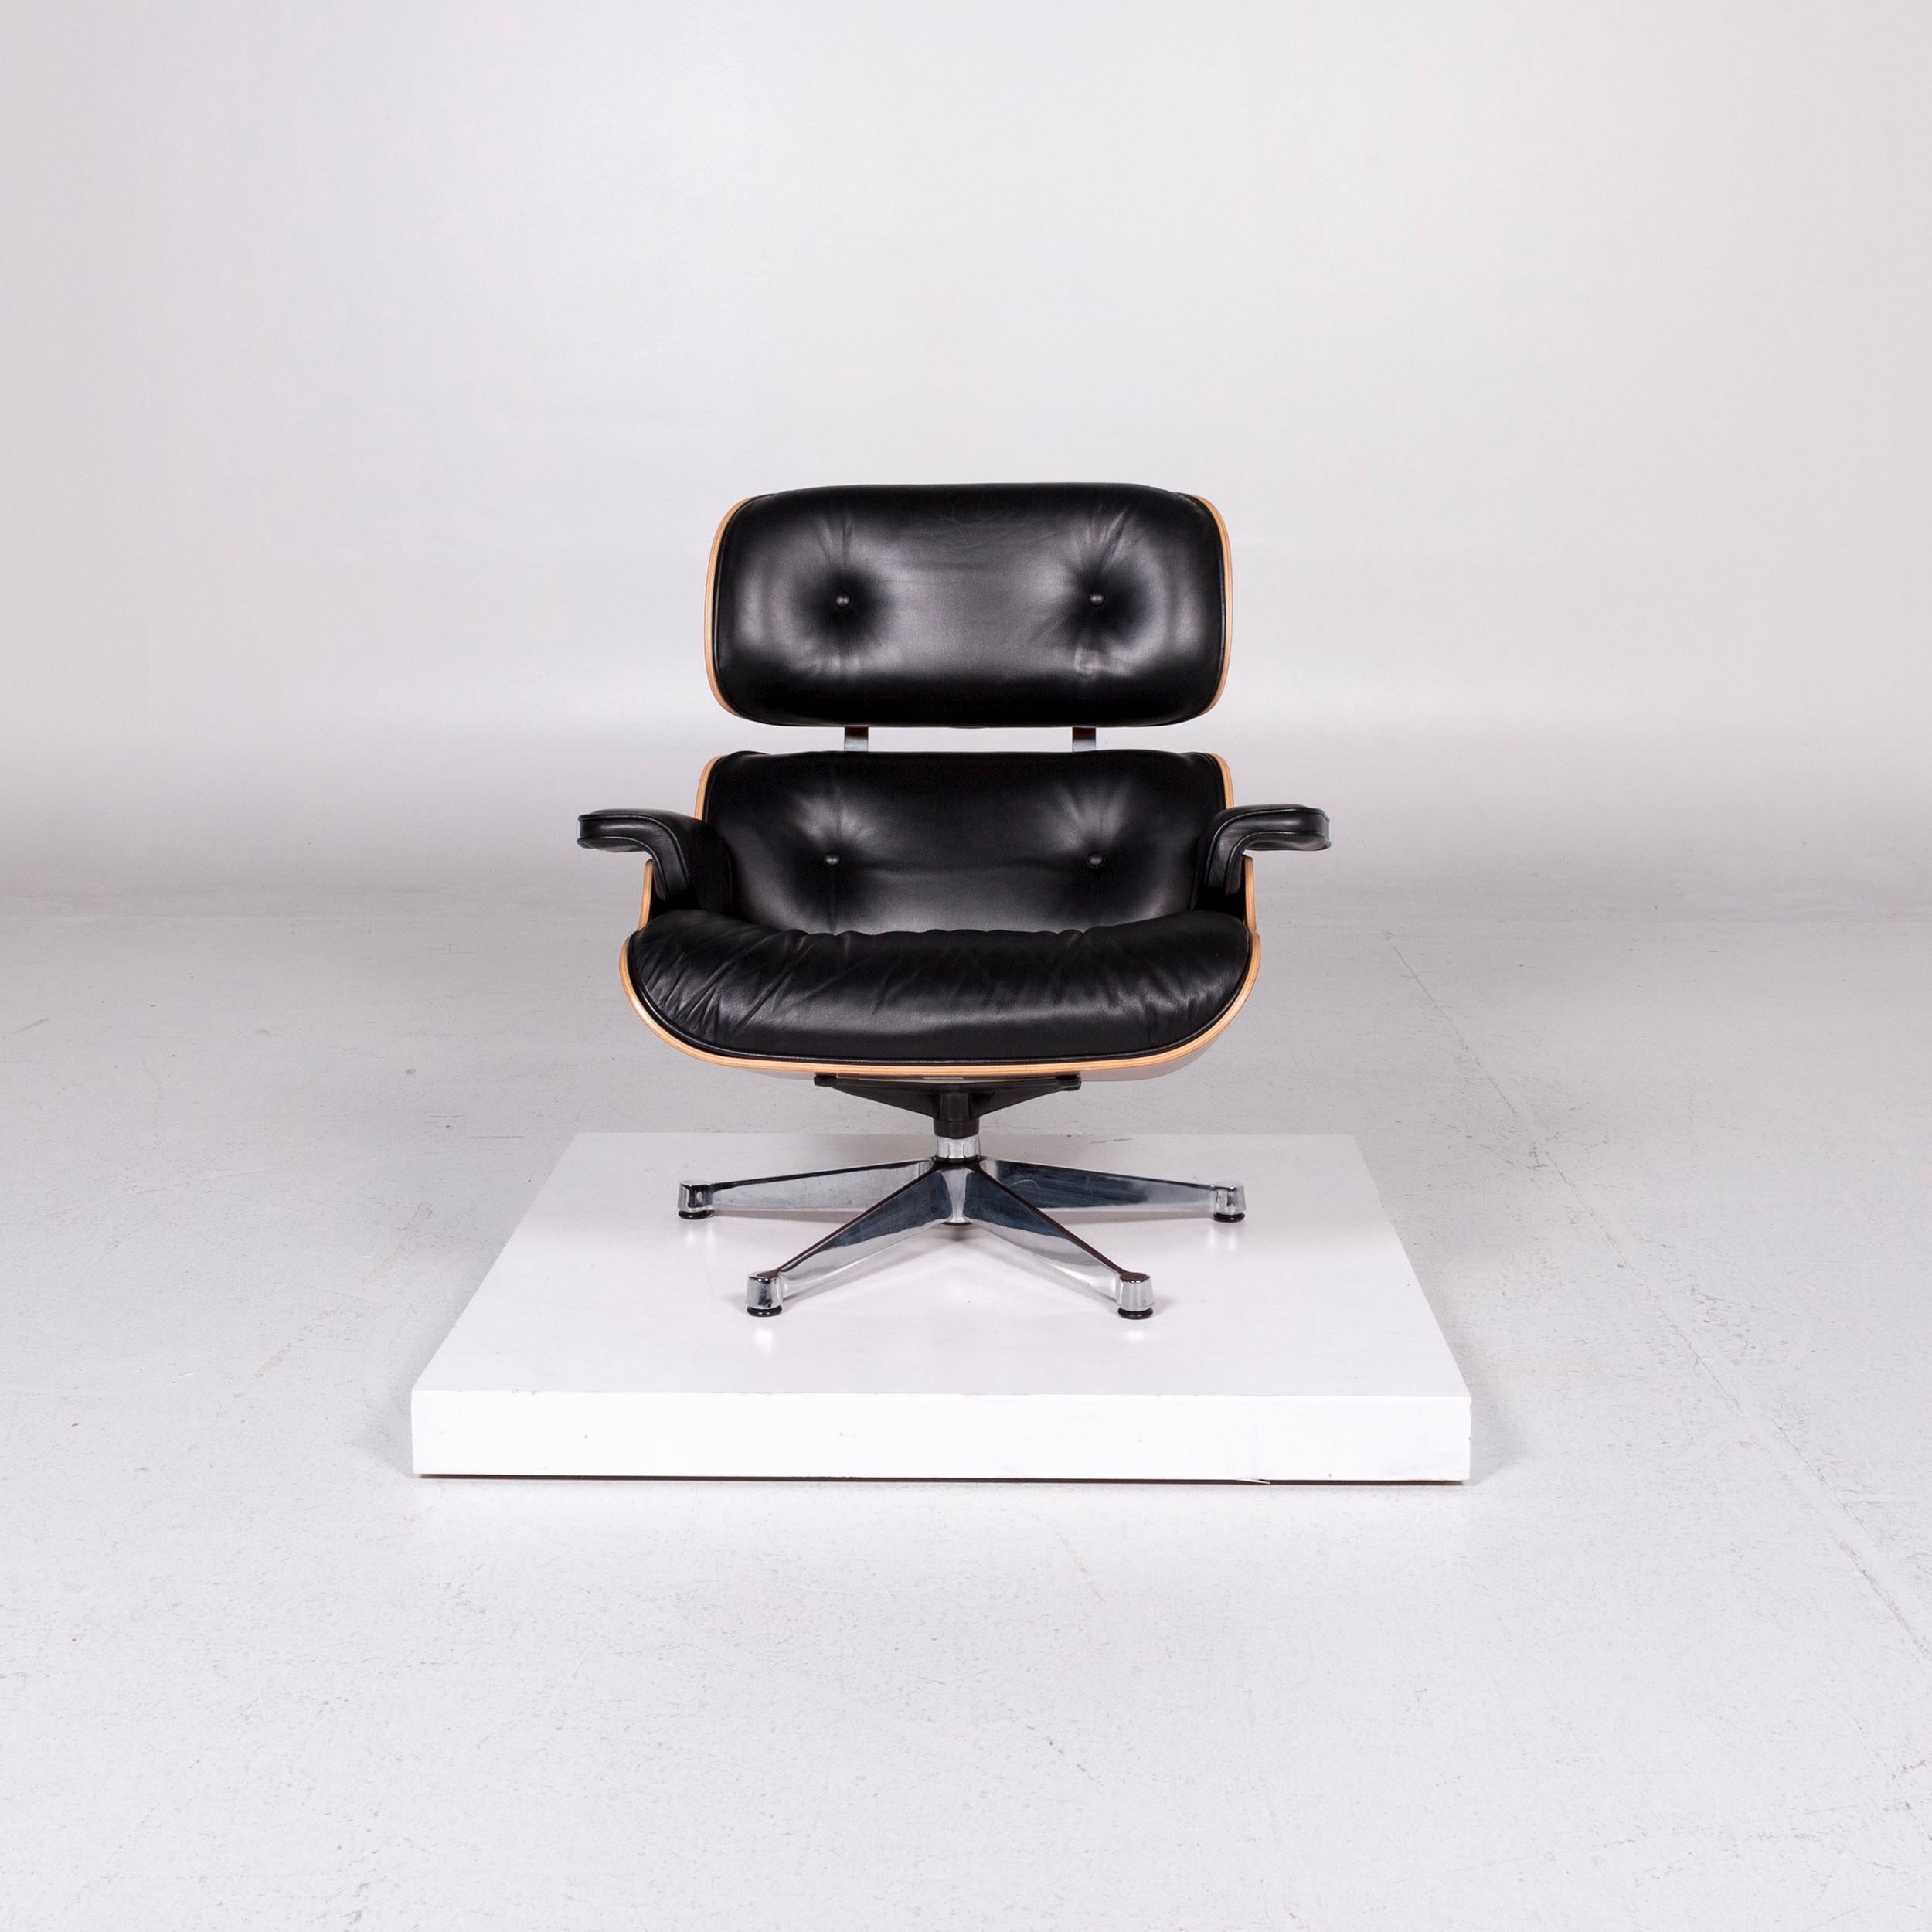 We bring to you a Vitra Eames lounge chair leather armchair black incl. stool cherrywood club.
   
 
 Product measurements in centimeters:
 
 Depth 89
Width 84
Height 89
Seat-height 40
Rest-height50
Seat-depth 51
Seat-width